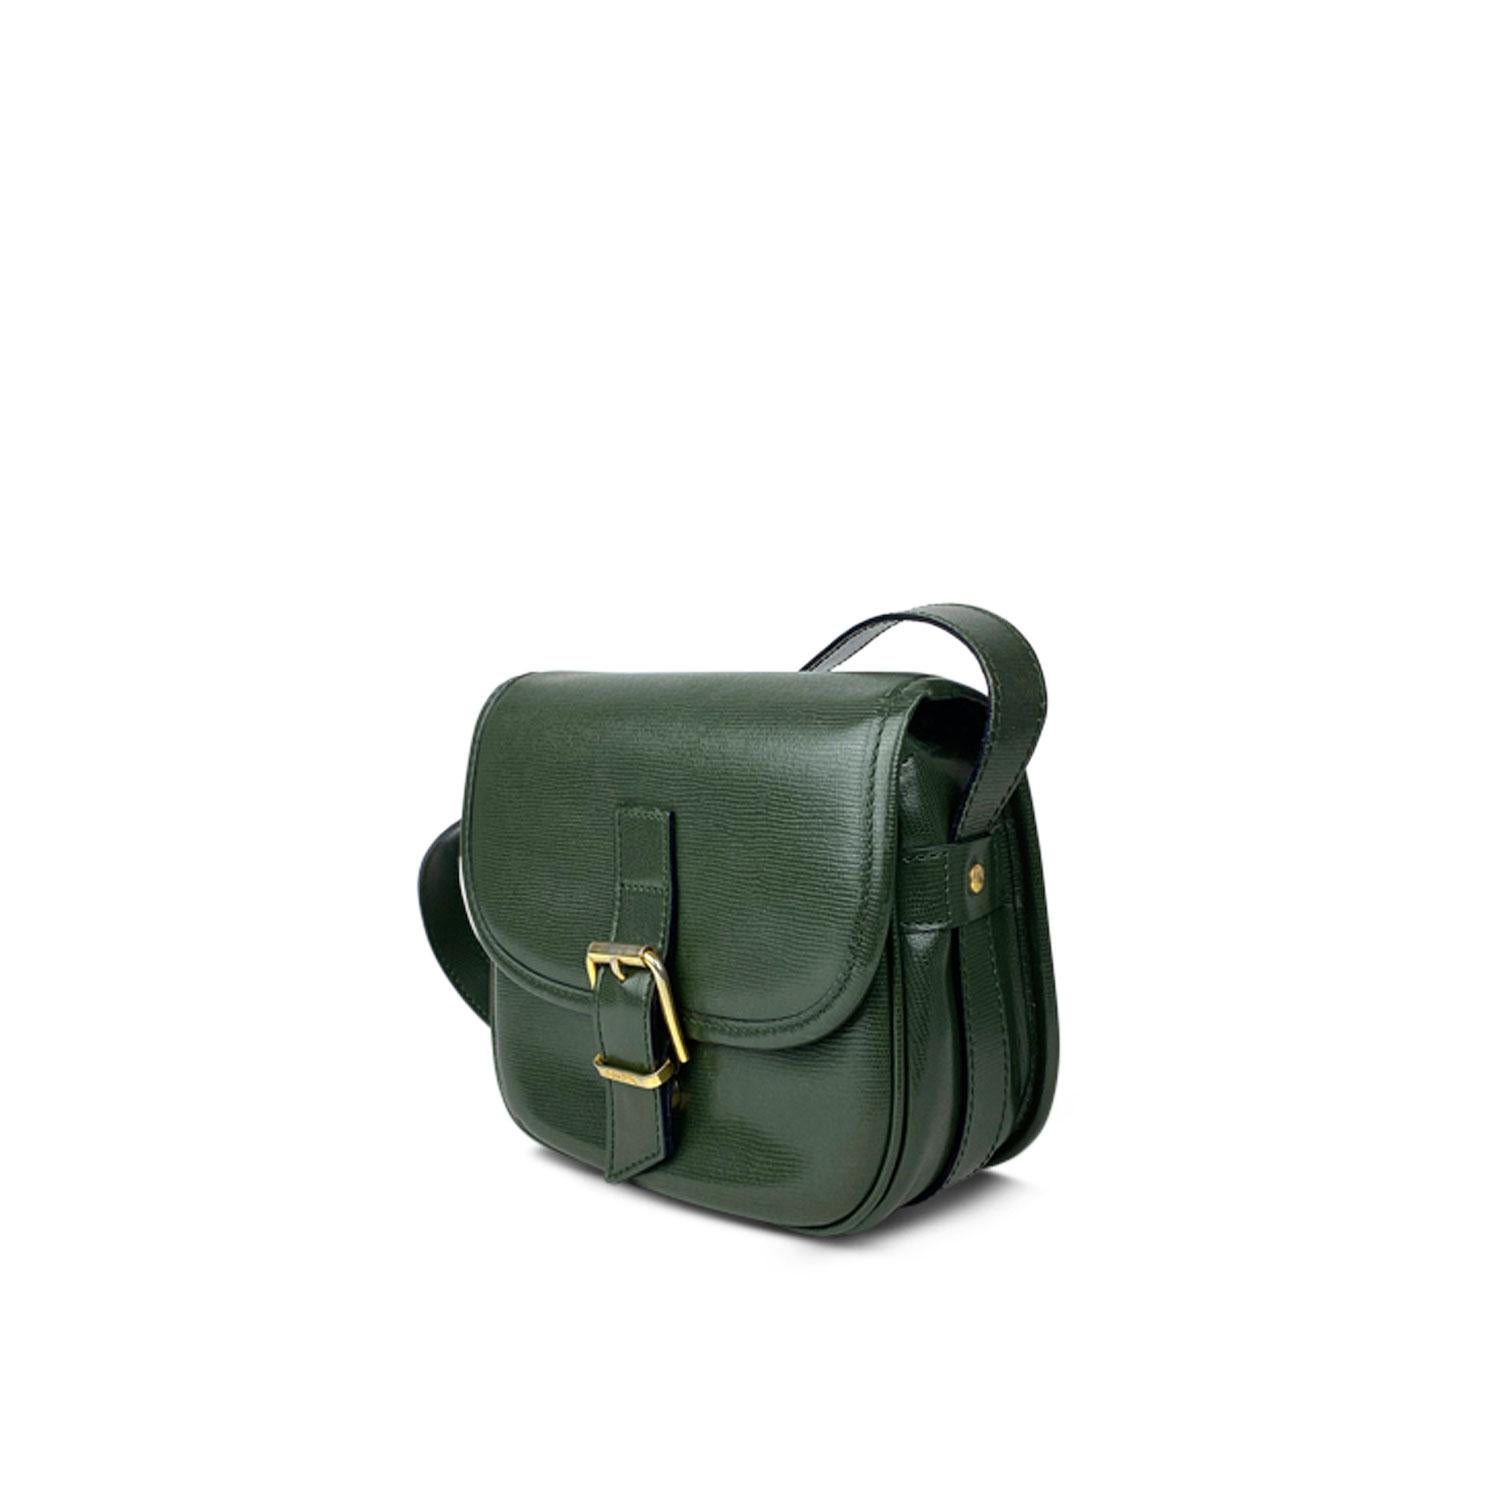 Green calfskin Céline crossbody bag with 

- Gold-tone hardware
- Single flat adjustable leather shoulder strap
- Single slit pocket at exterior back
- Red leather lining
- Single zip pocket at interior wall and magnetic closure at front

Overall